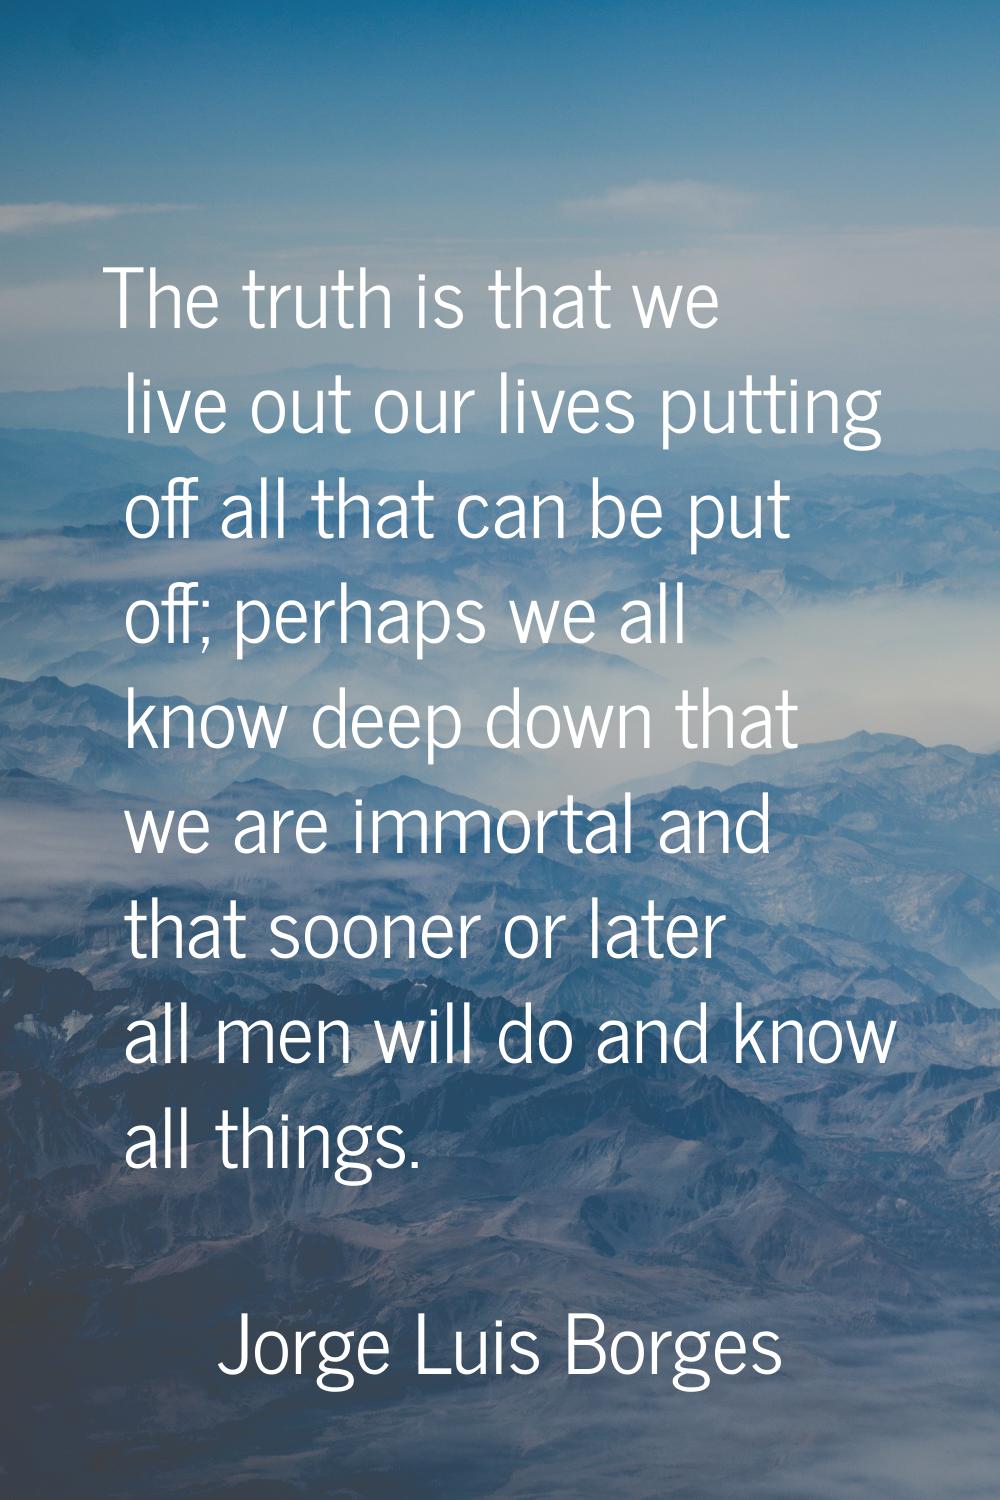 The truth is that we live out our lives putting off all that can be put off; perhaps we all know de